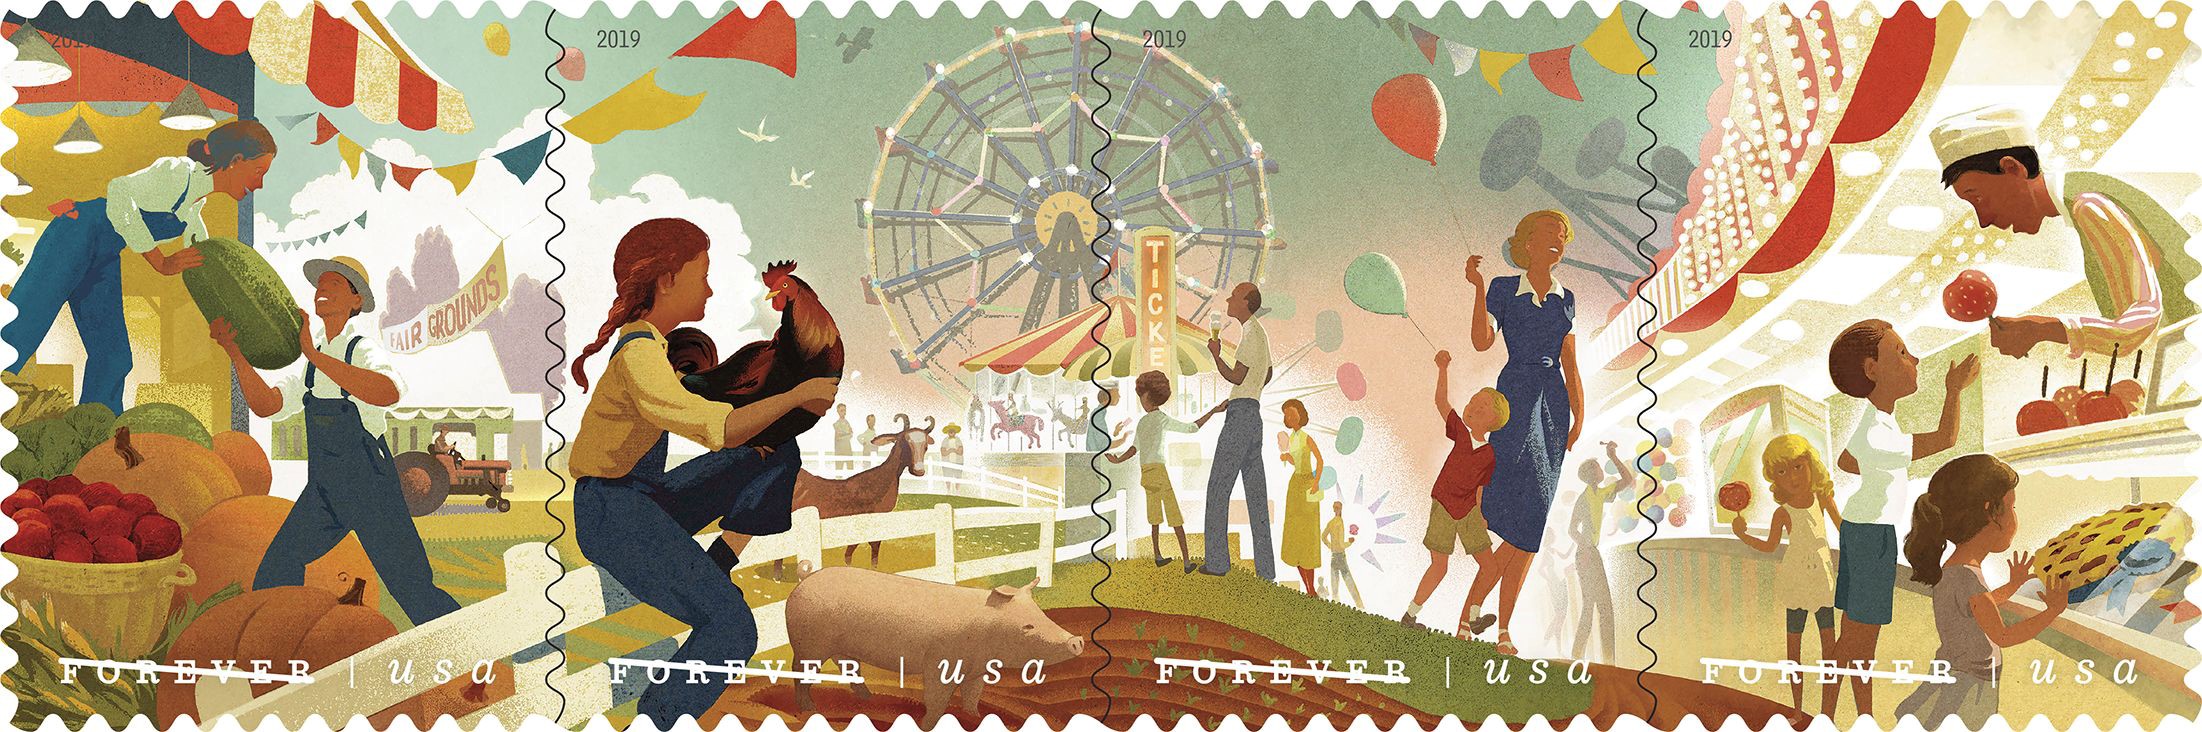 America's state and county fairs Forever stamps